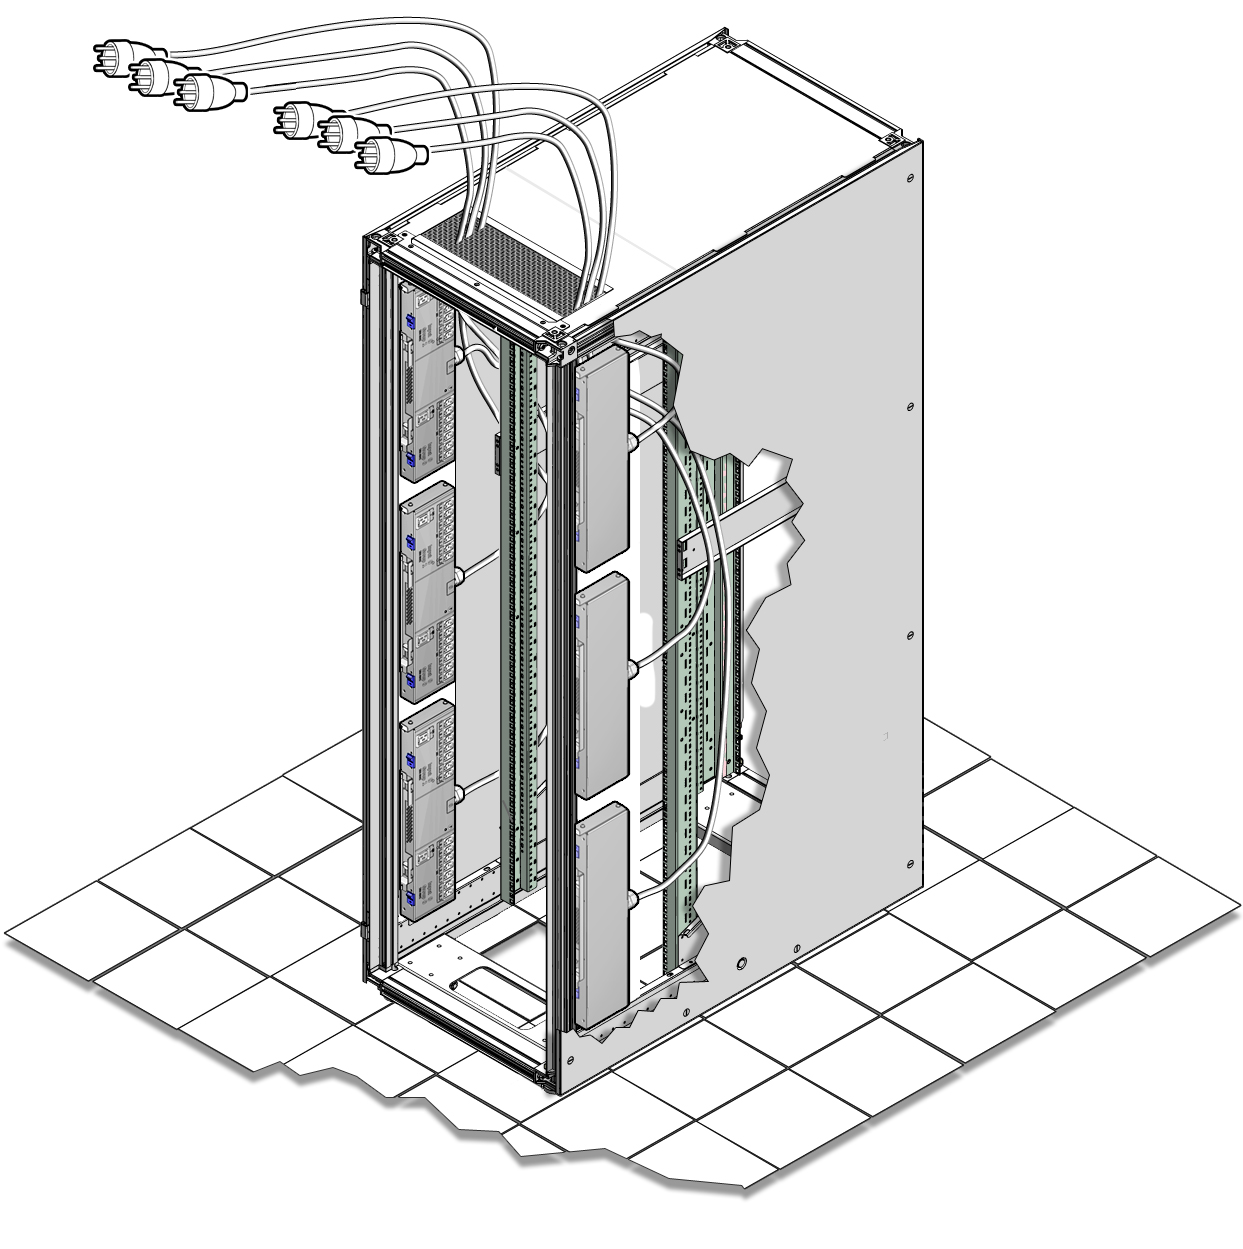 image:Figure showing how to route the compact PDU power lead cords up through the top cable window.